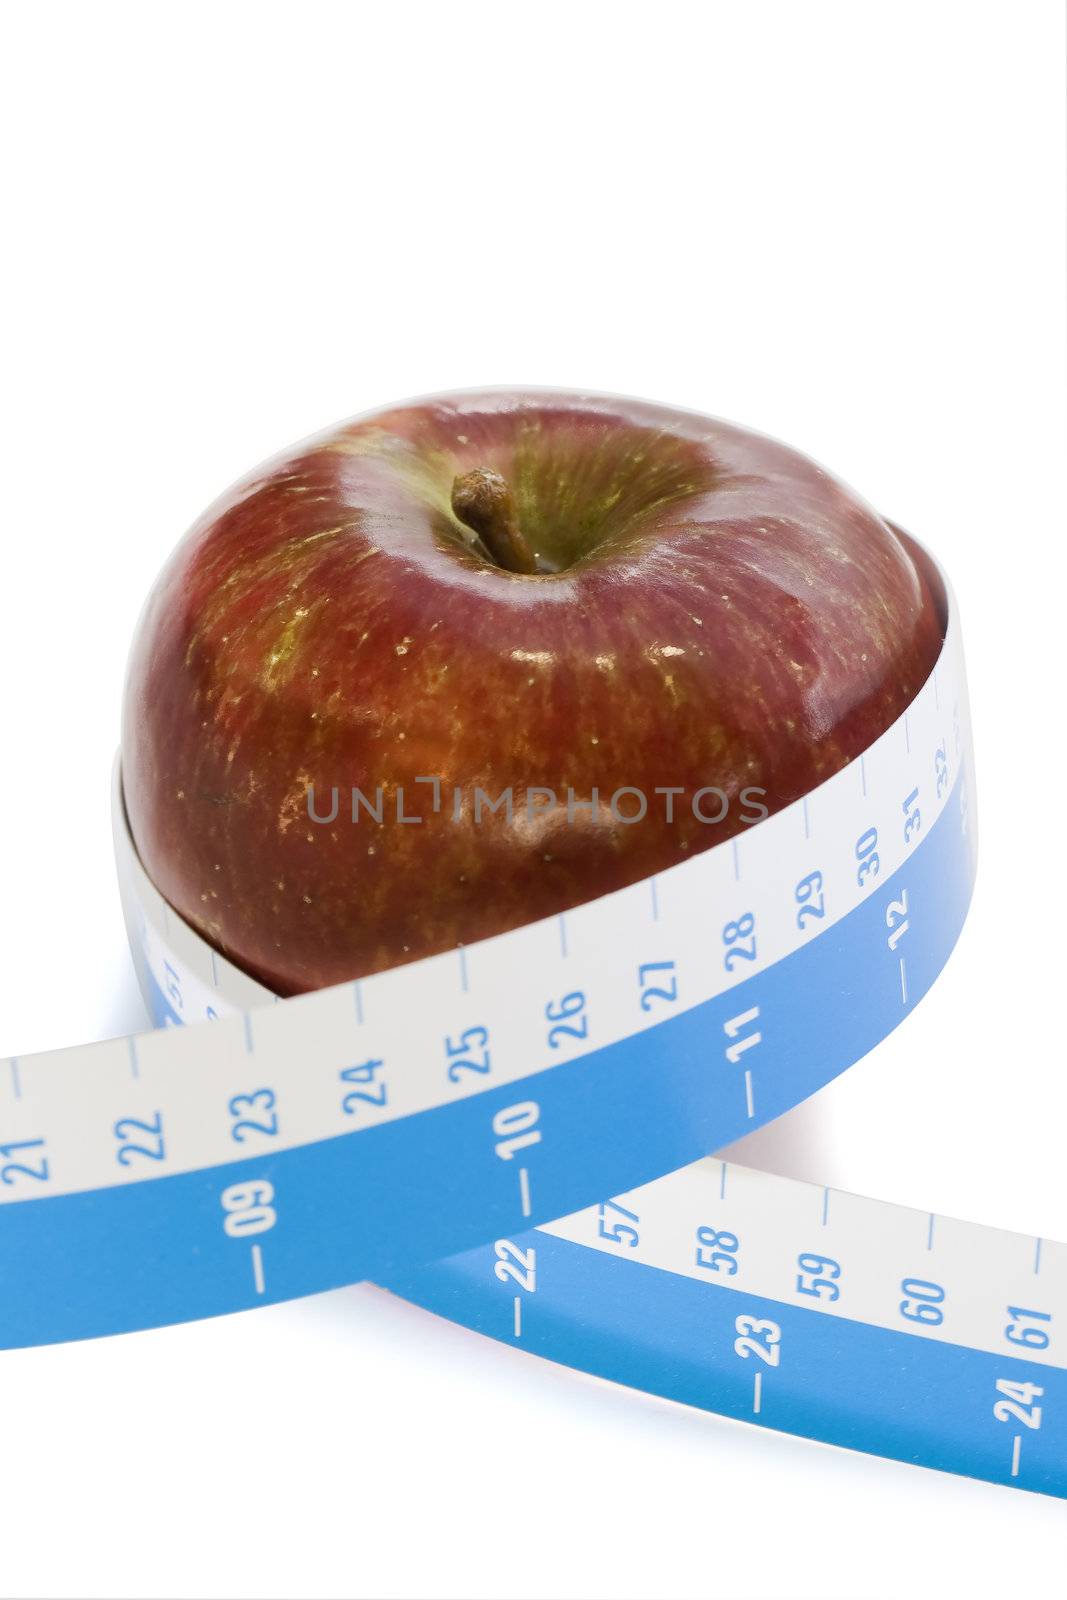 Red Apple and tape measure  by PauloResende